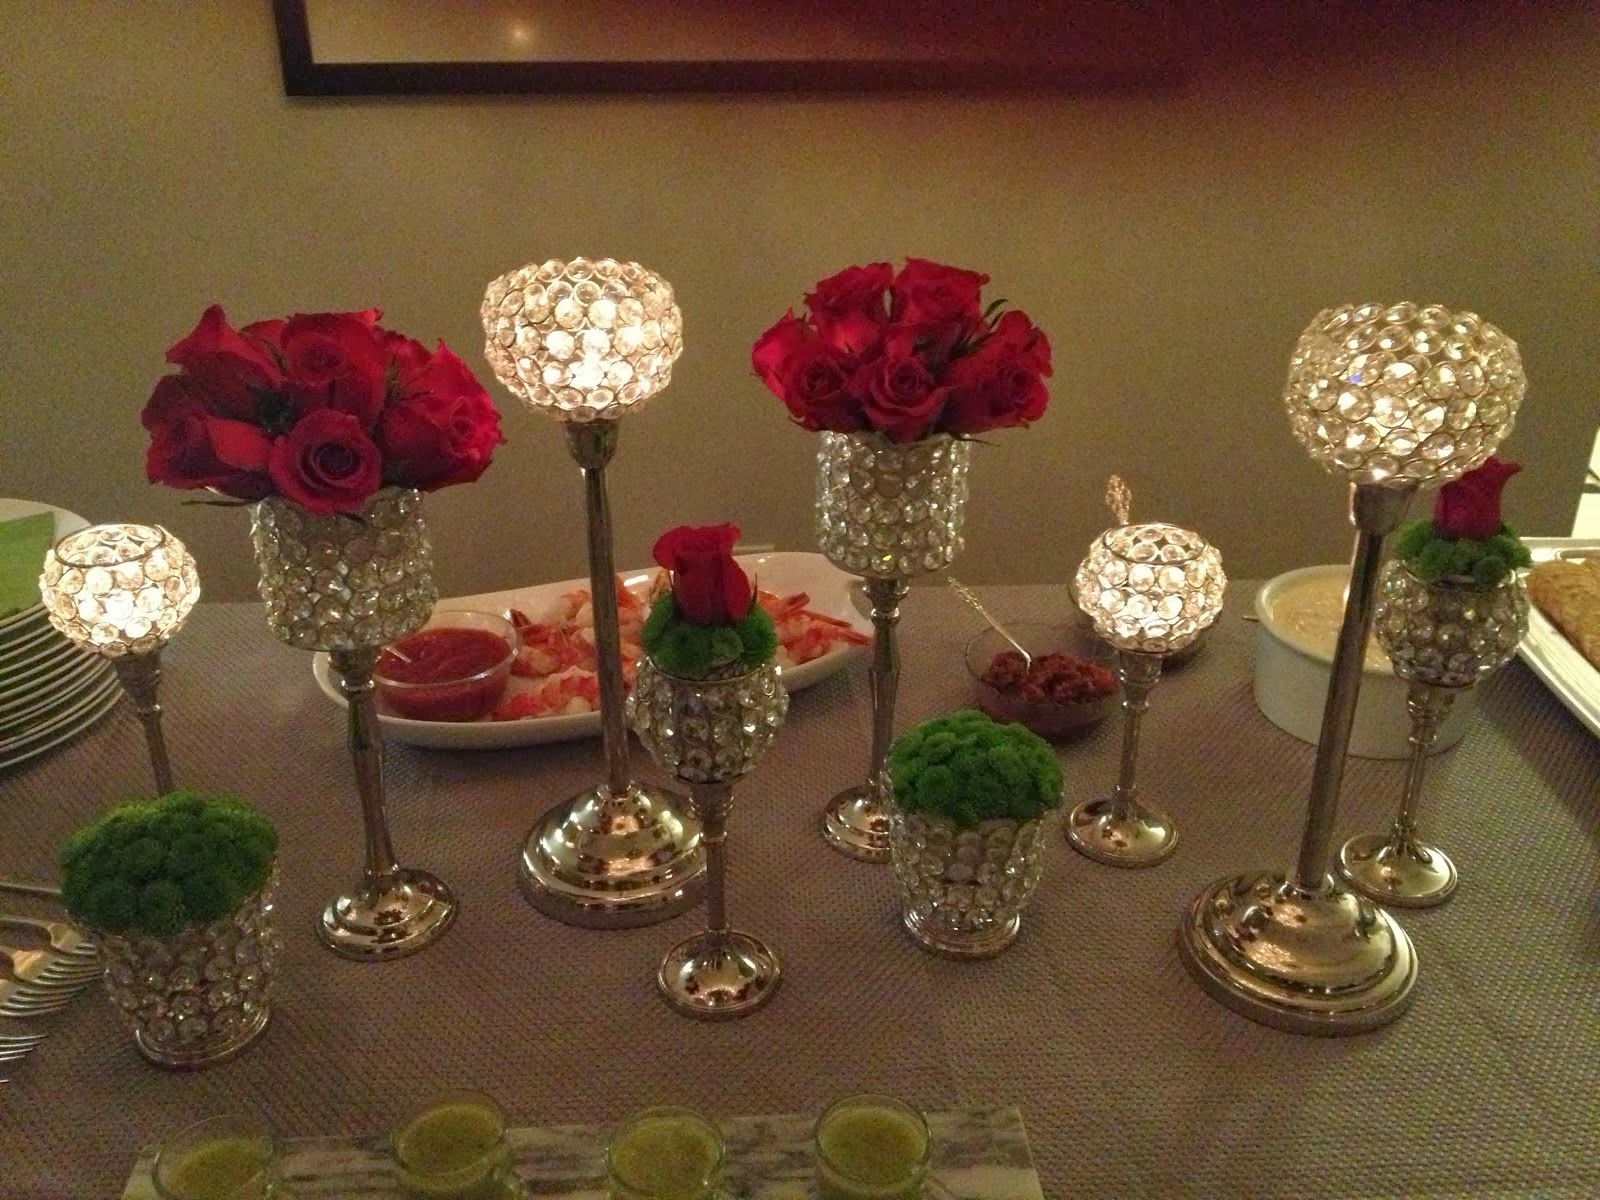 Roses, Candles...